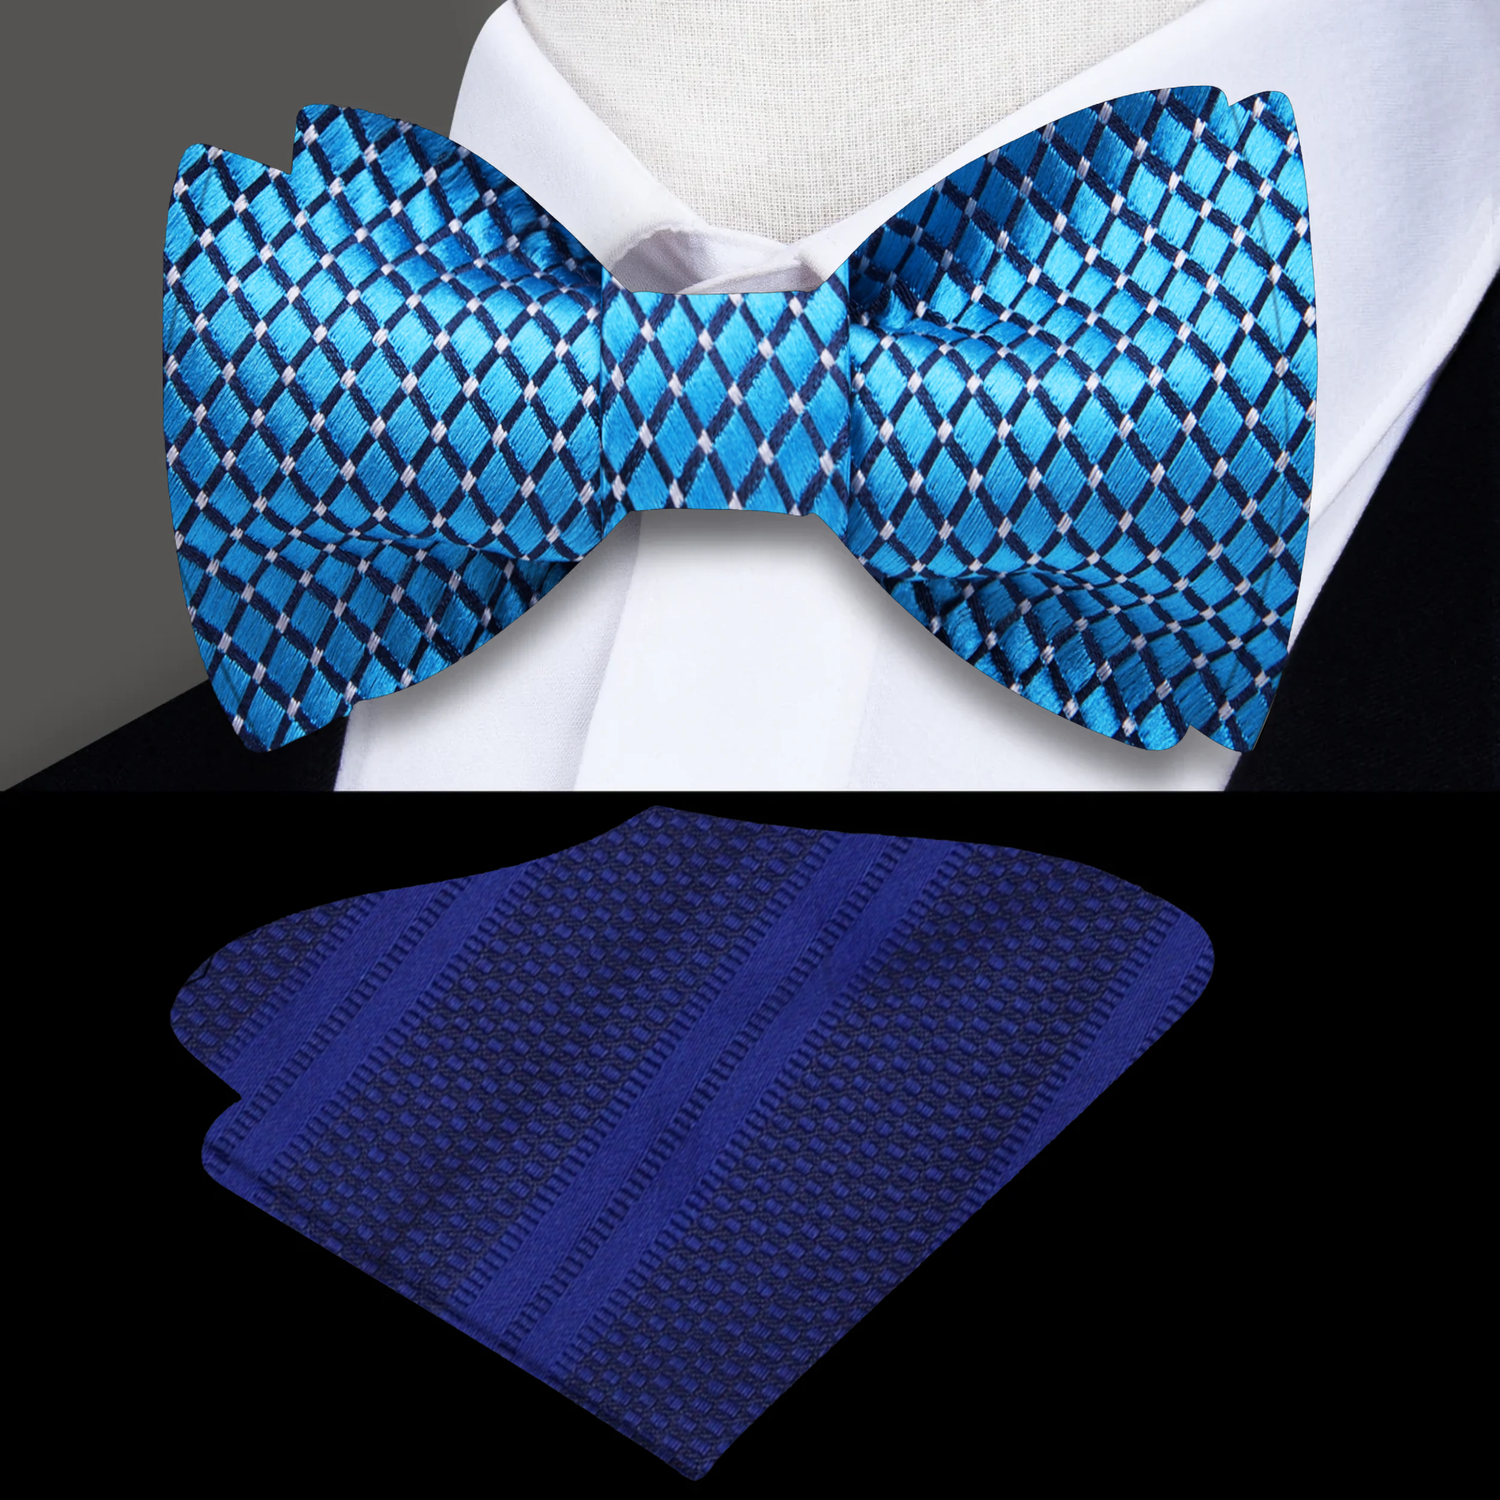 A Light Blue, White Small Geometric Diamond With Small Dots Pattern Silk Self Tie Bow Tie With Pocket Square